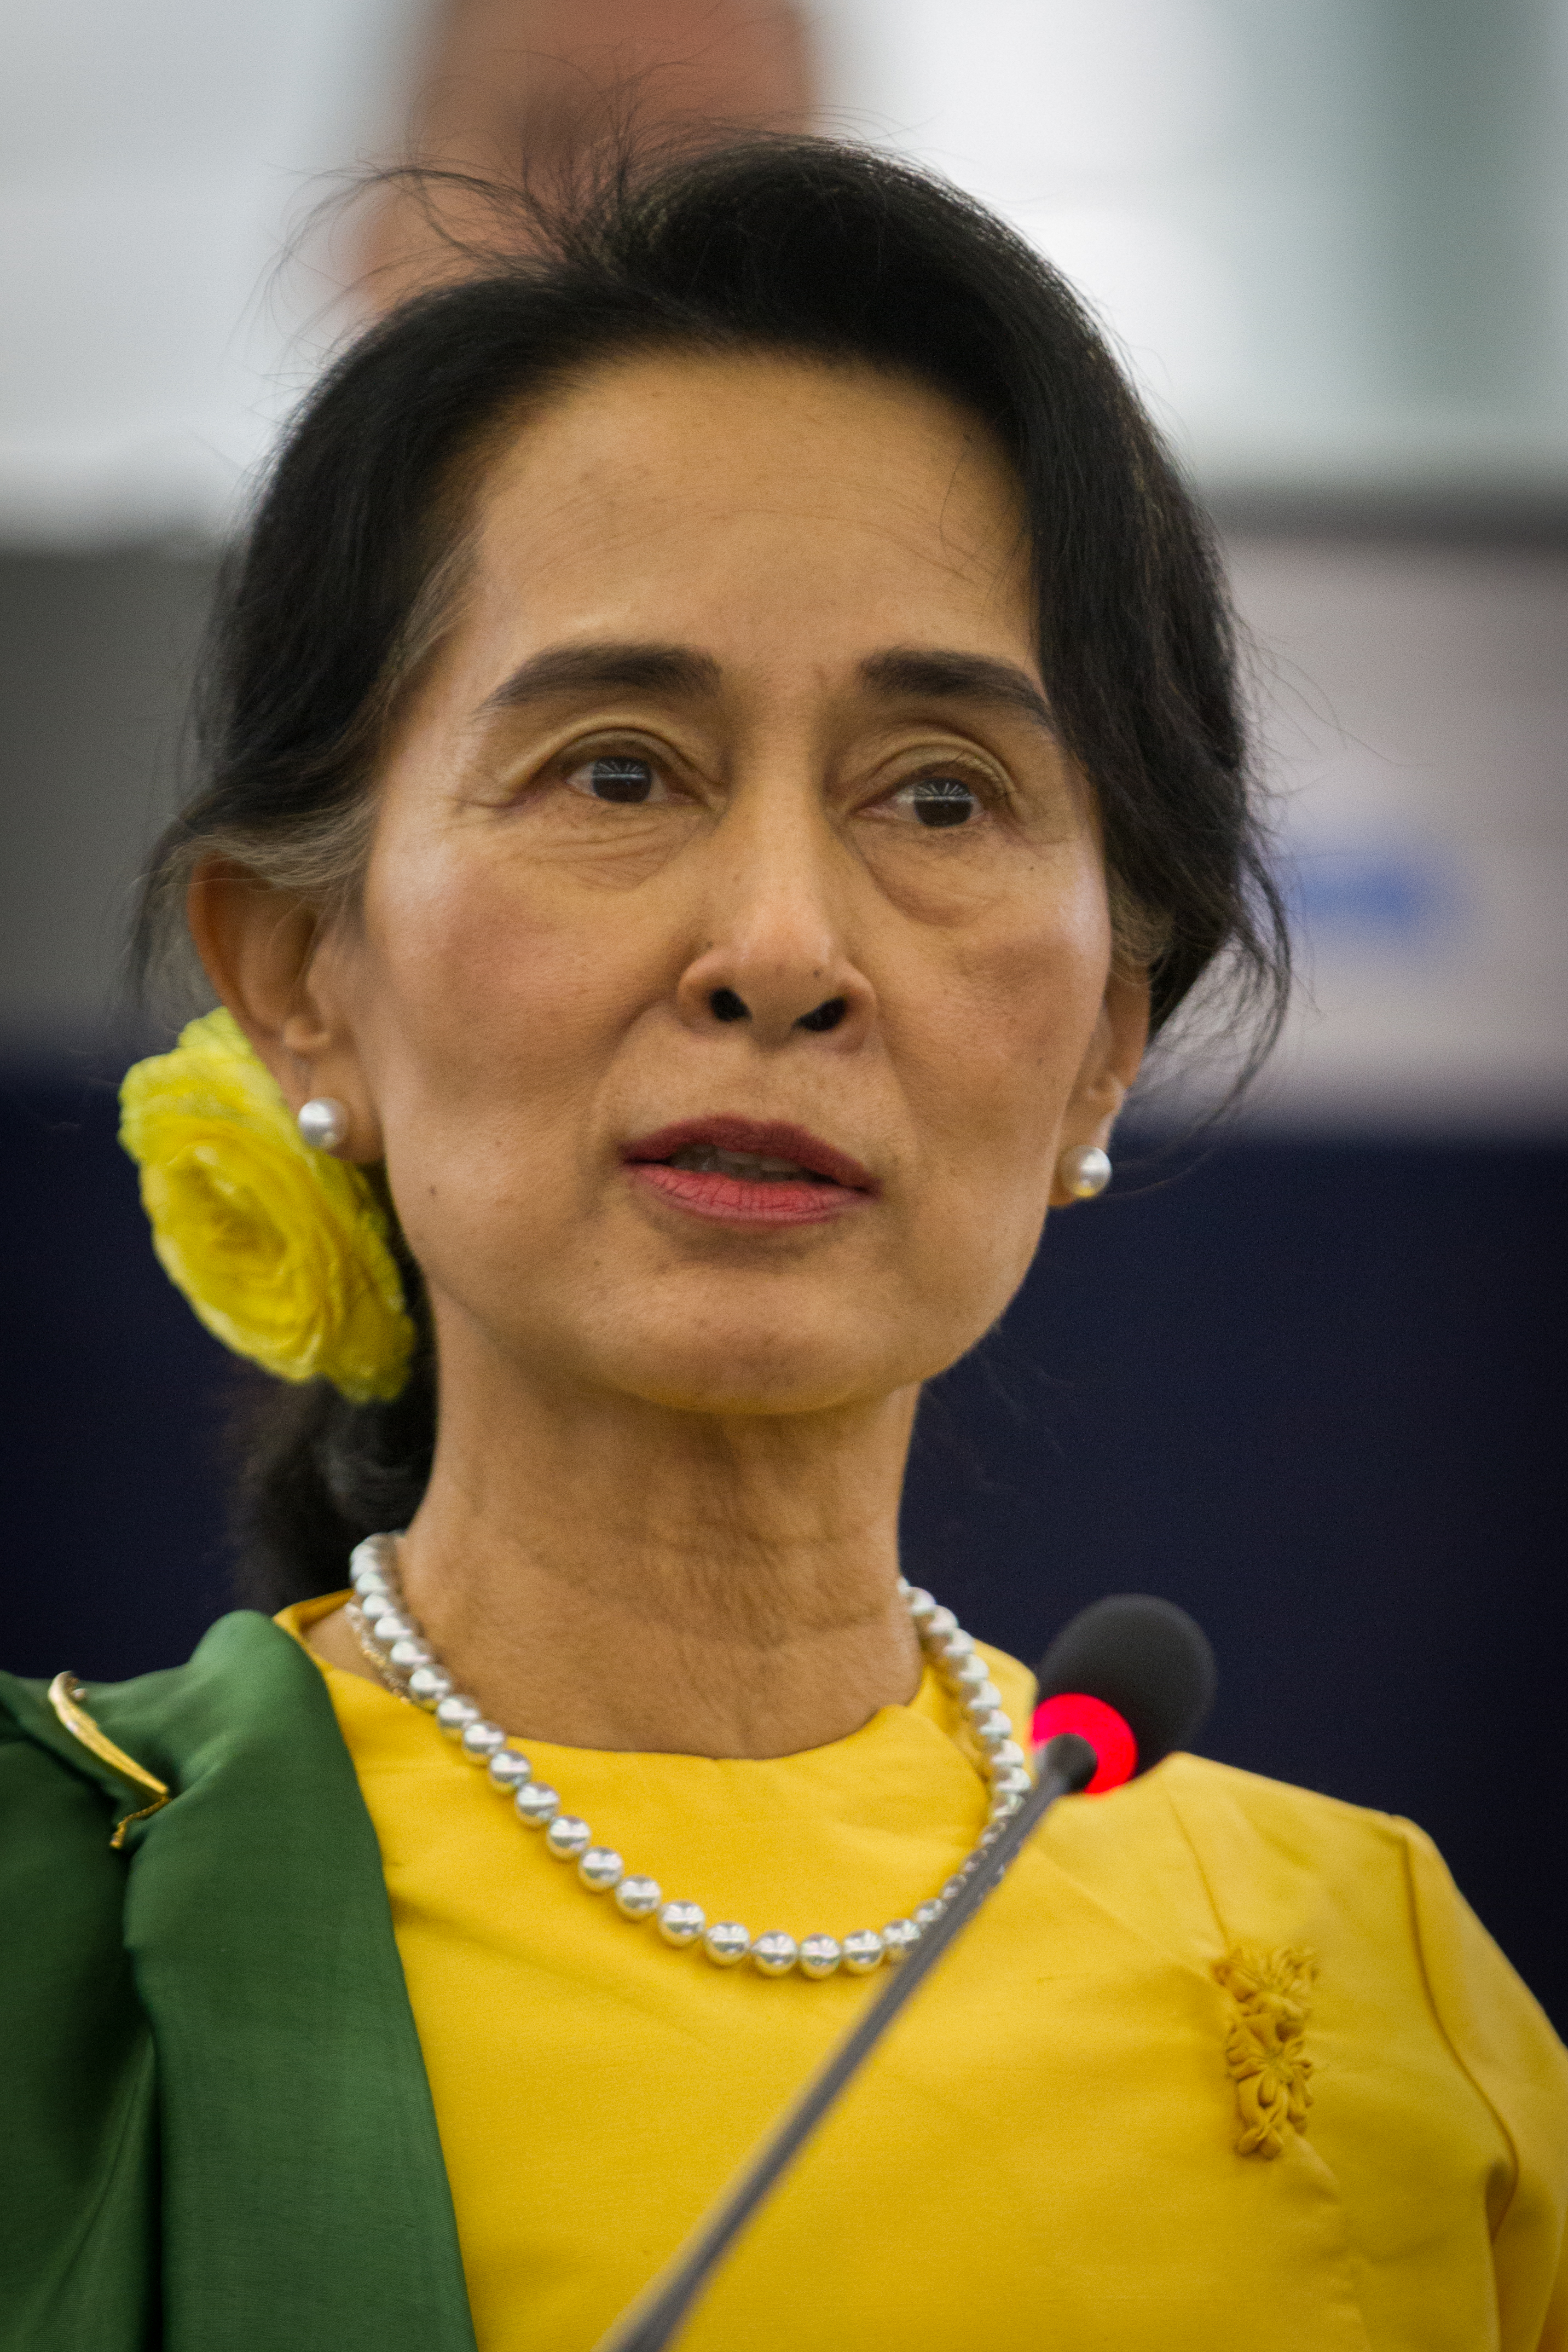  Nobel Peace Prize awarded to Aung San Suu Kyi in 1991 cannot be revoked